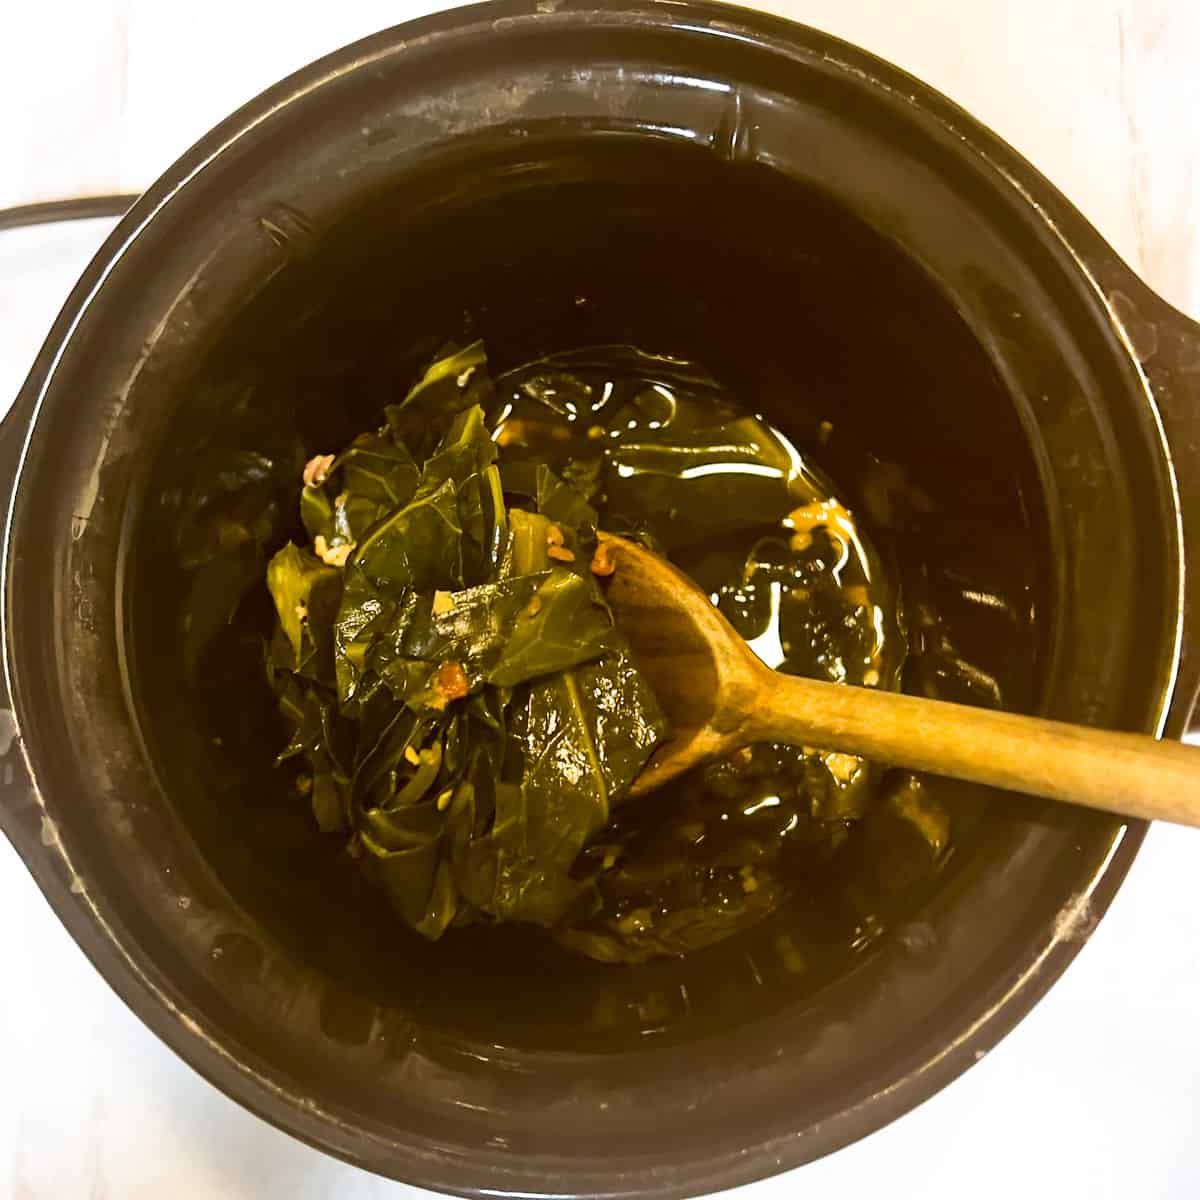 Collard greens cooked in small crockpot.